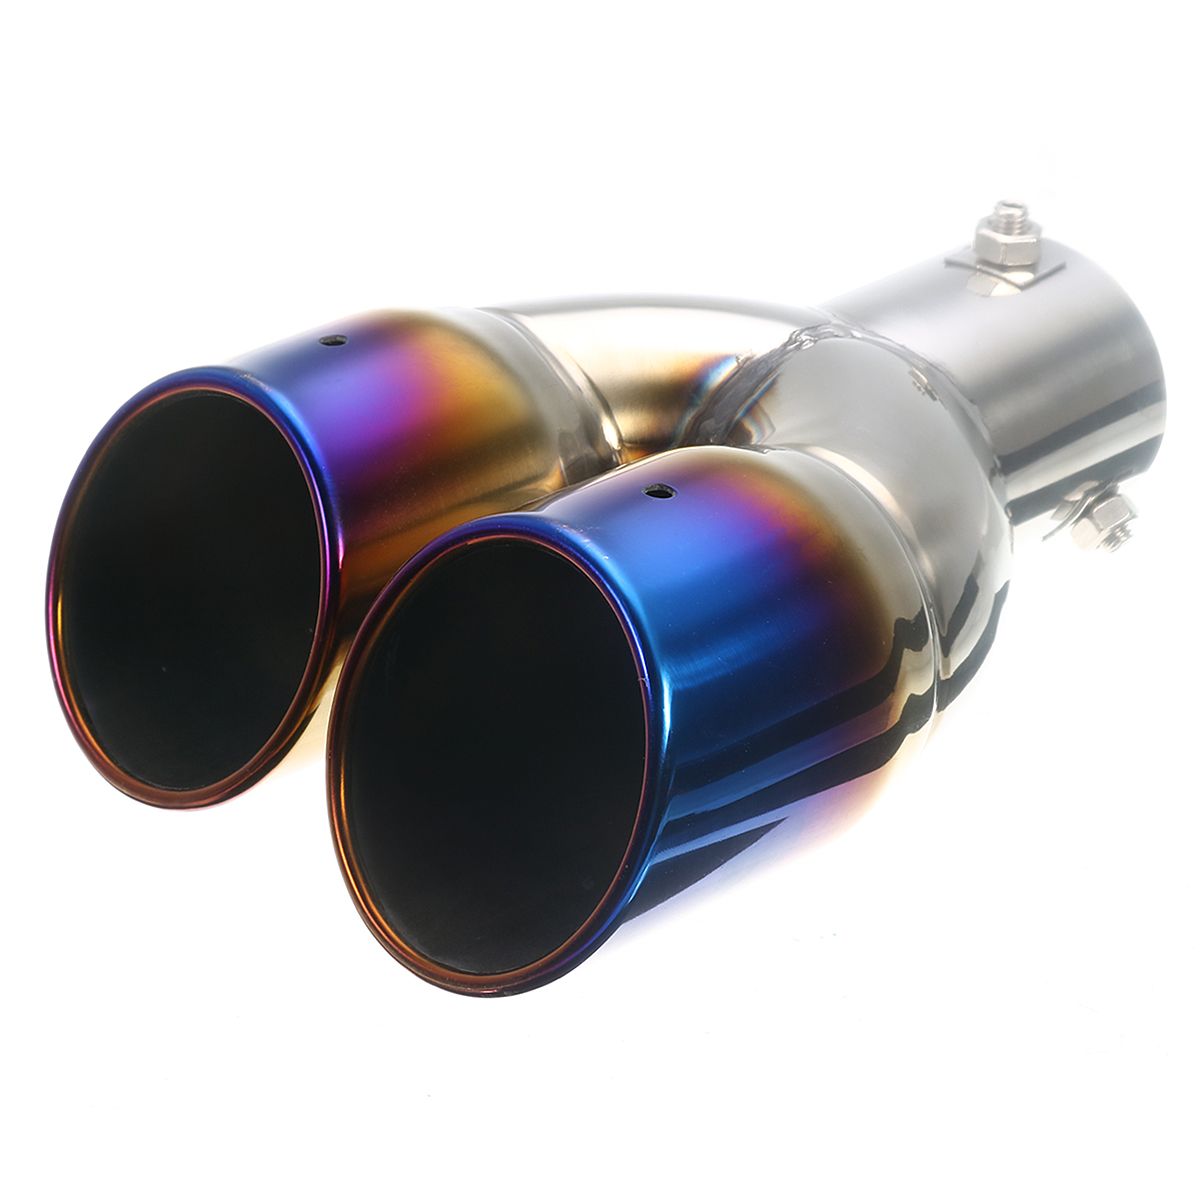 63mm-Universal-Car-Rear-Dual-Air-Outlet-Exhaust-Pipe-Bluing-Tail-Muffler-Tip-1200052